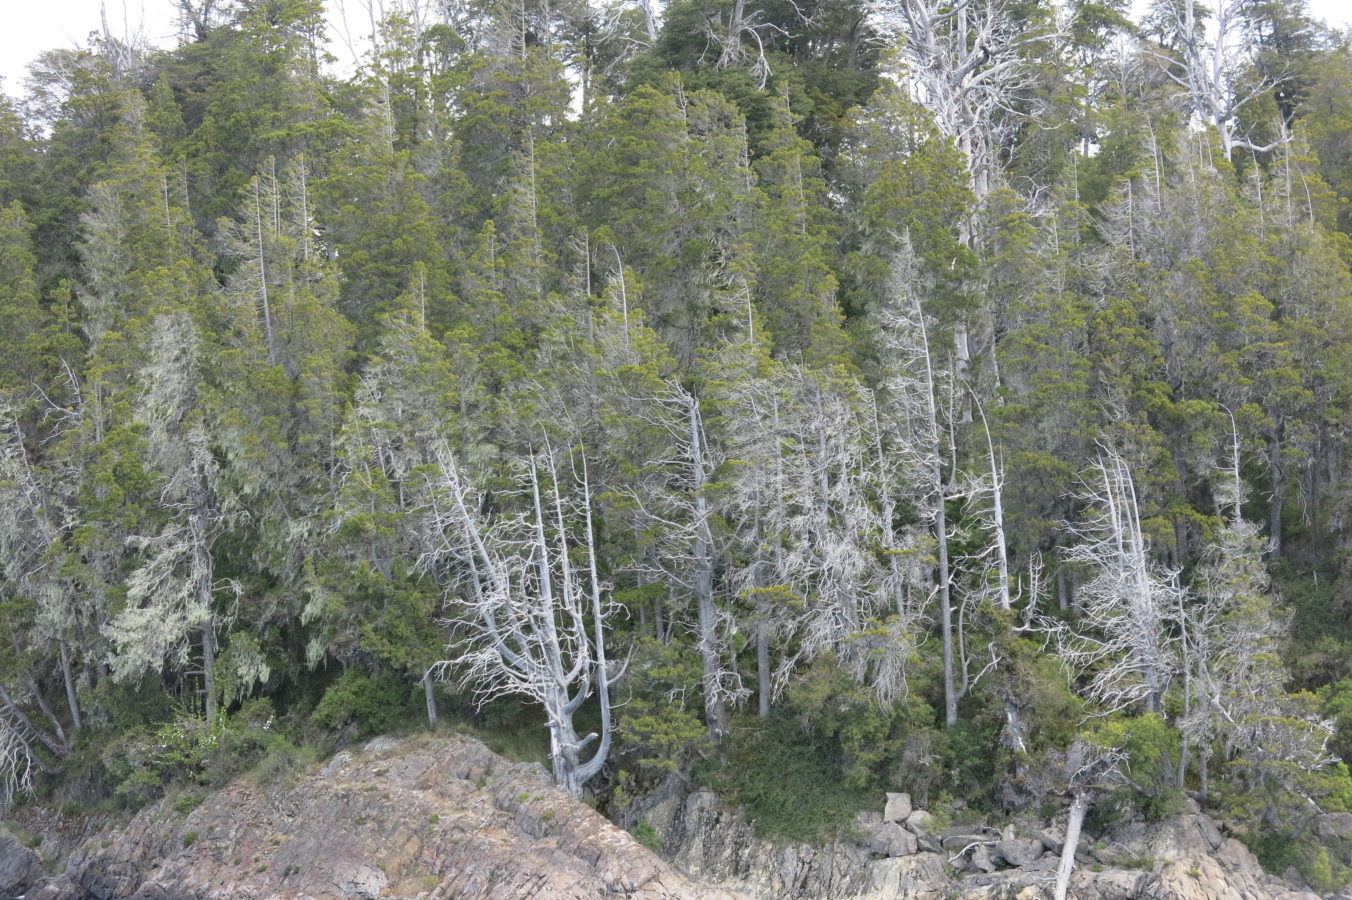 Dying trees due to Phytopthora austrocedrae  - Llao Llao, Argentina (2017)